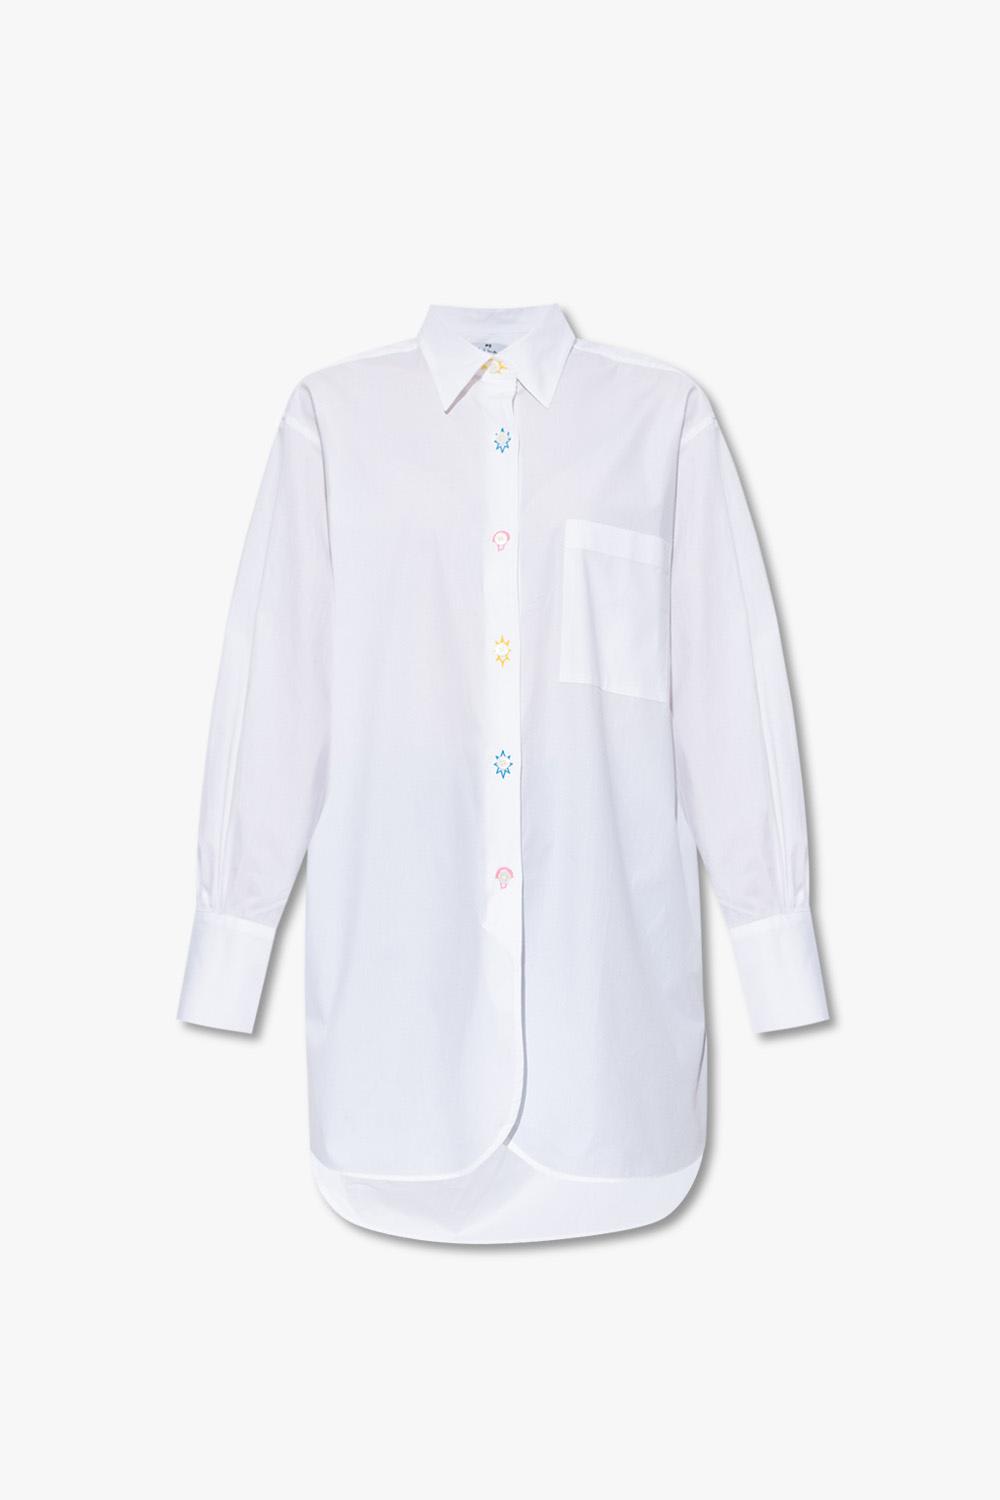 PS BY PAUL SMITH SHIRT IN ORGANIC COTTON